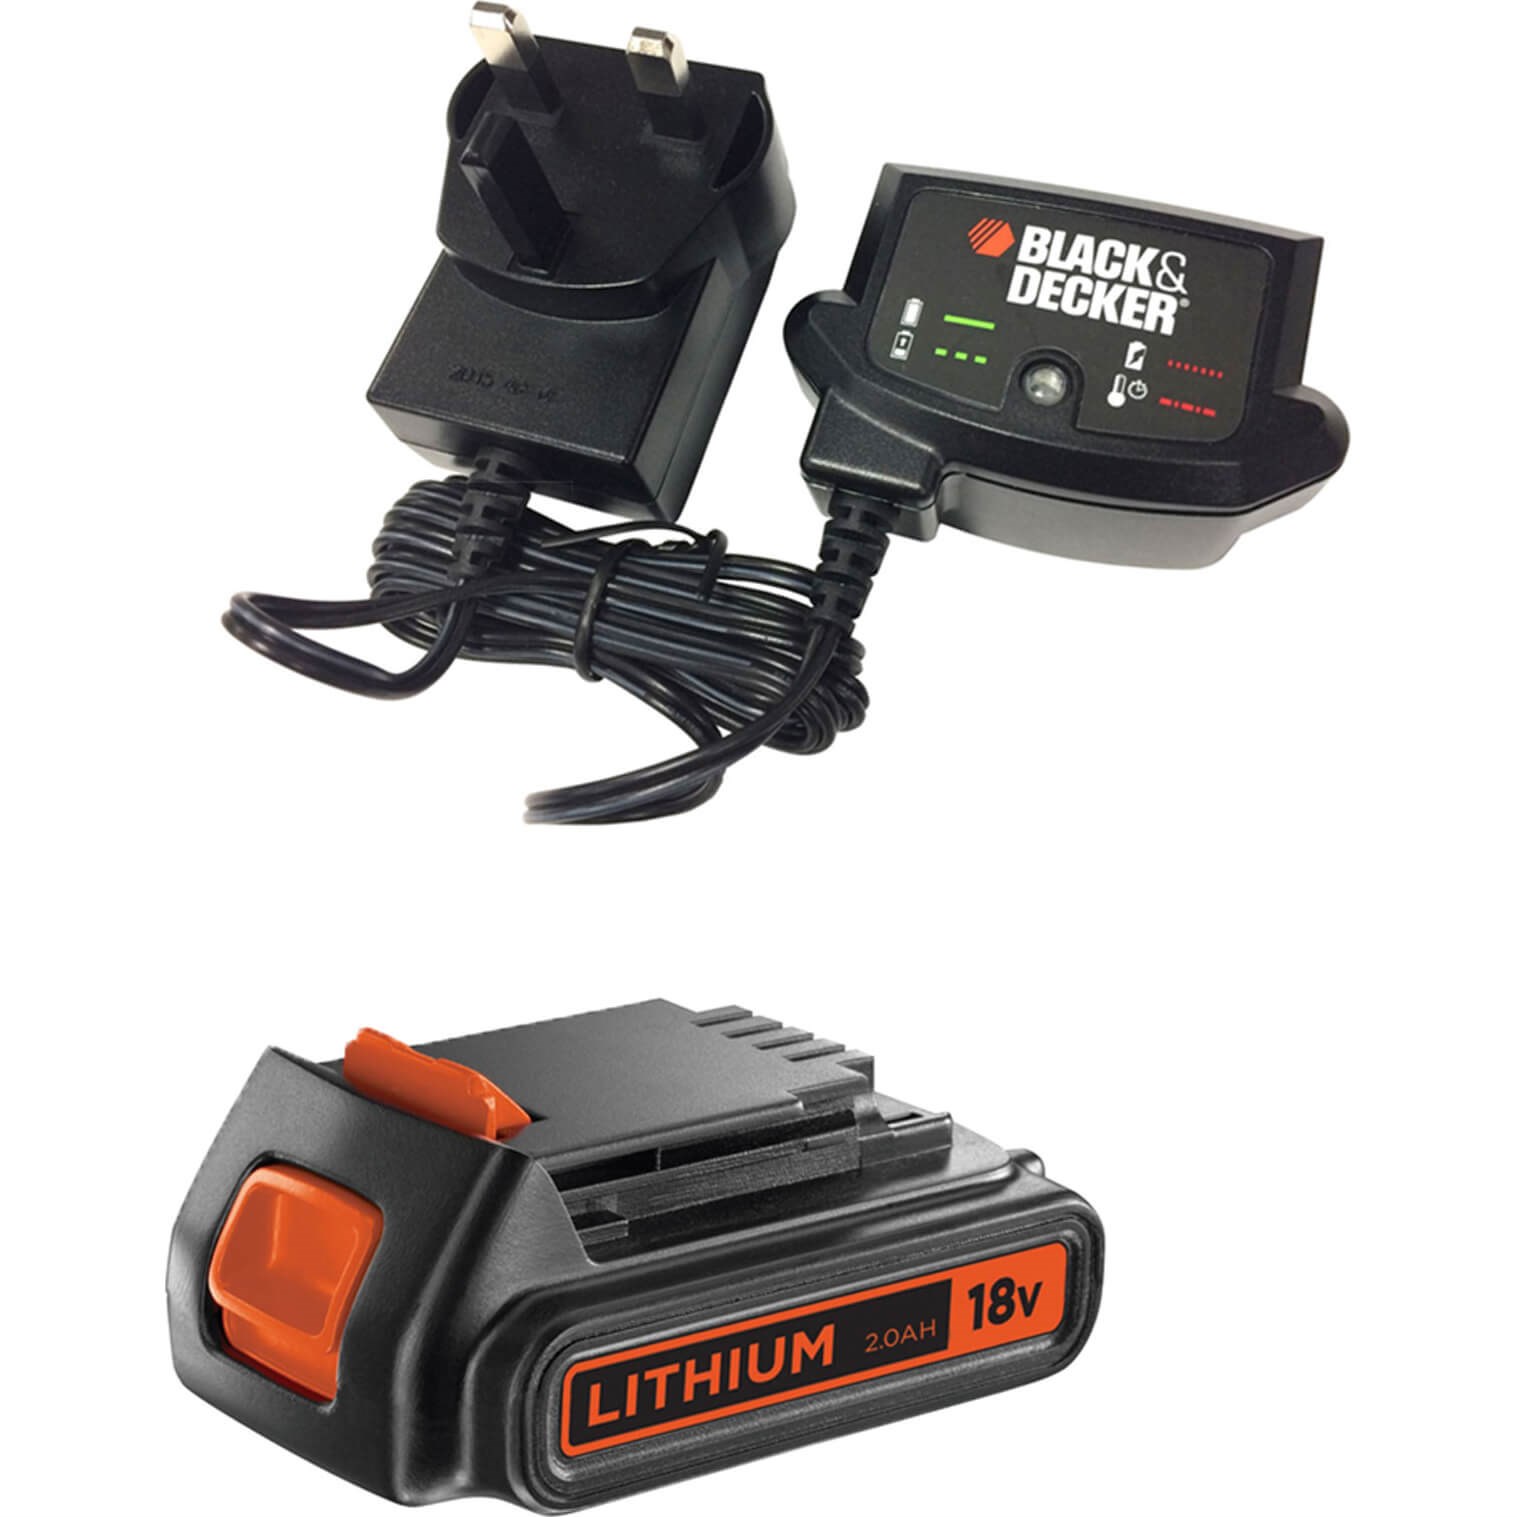 Black & Decker 10.8 - 18 Volt Li-ion Slide Battery Charger Works With  Bl1518 Bl2018 Bl4018 N494099 from Spare Parts World